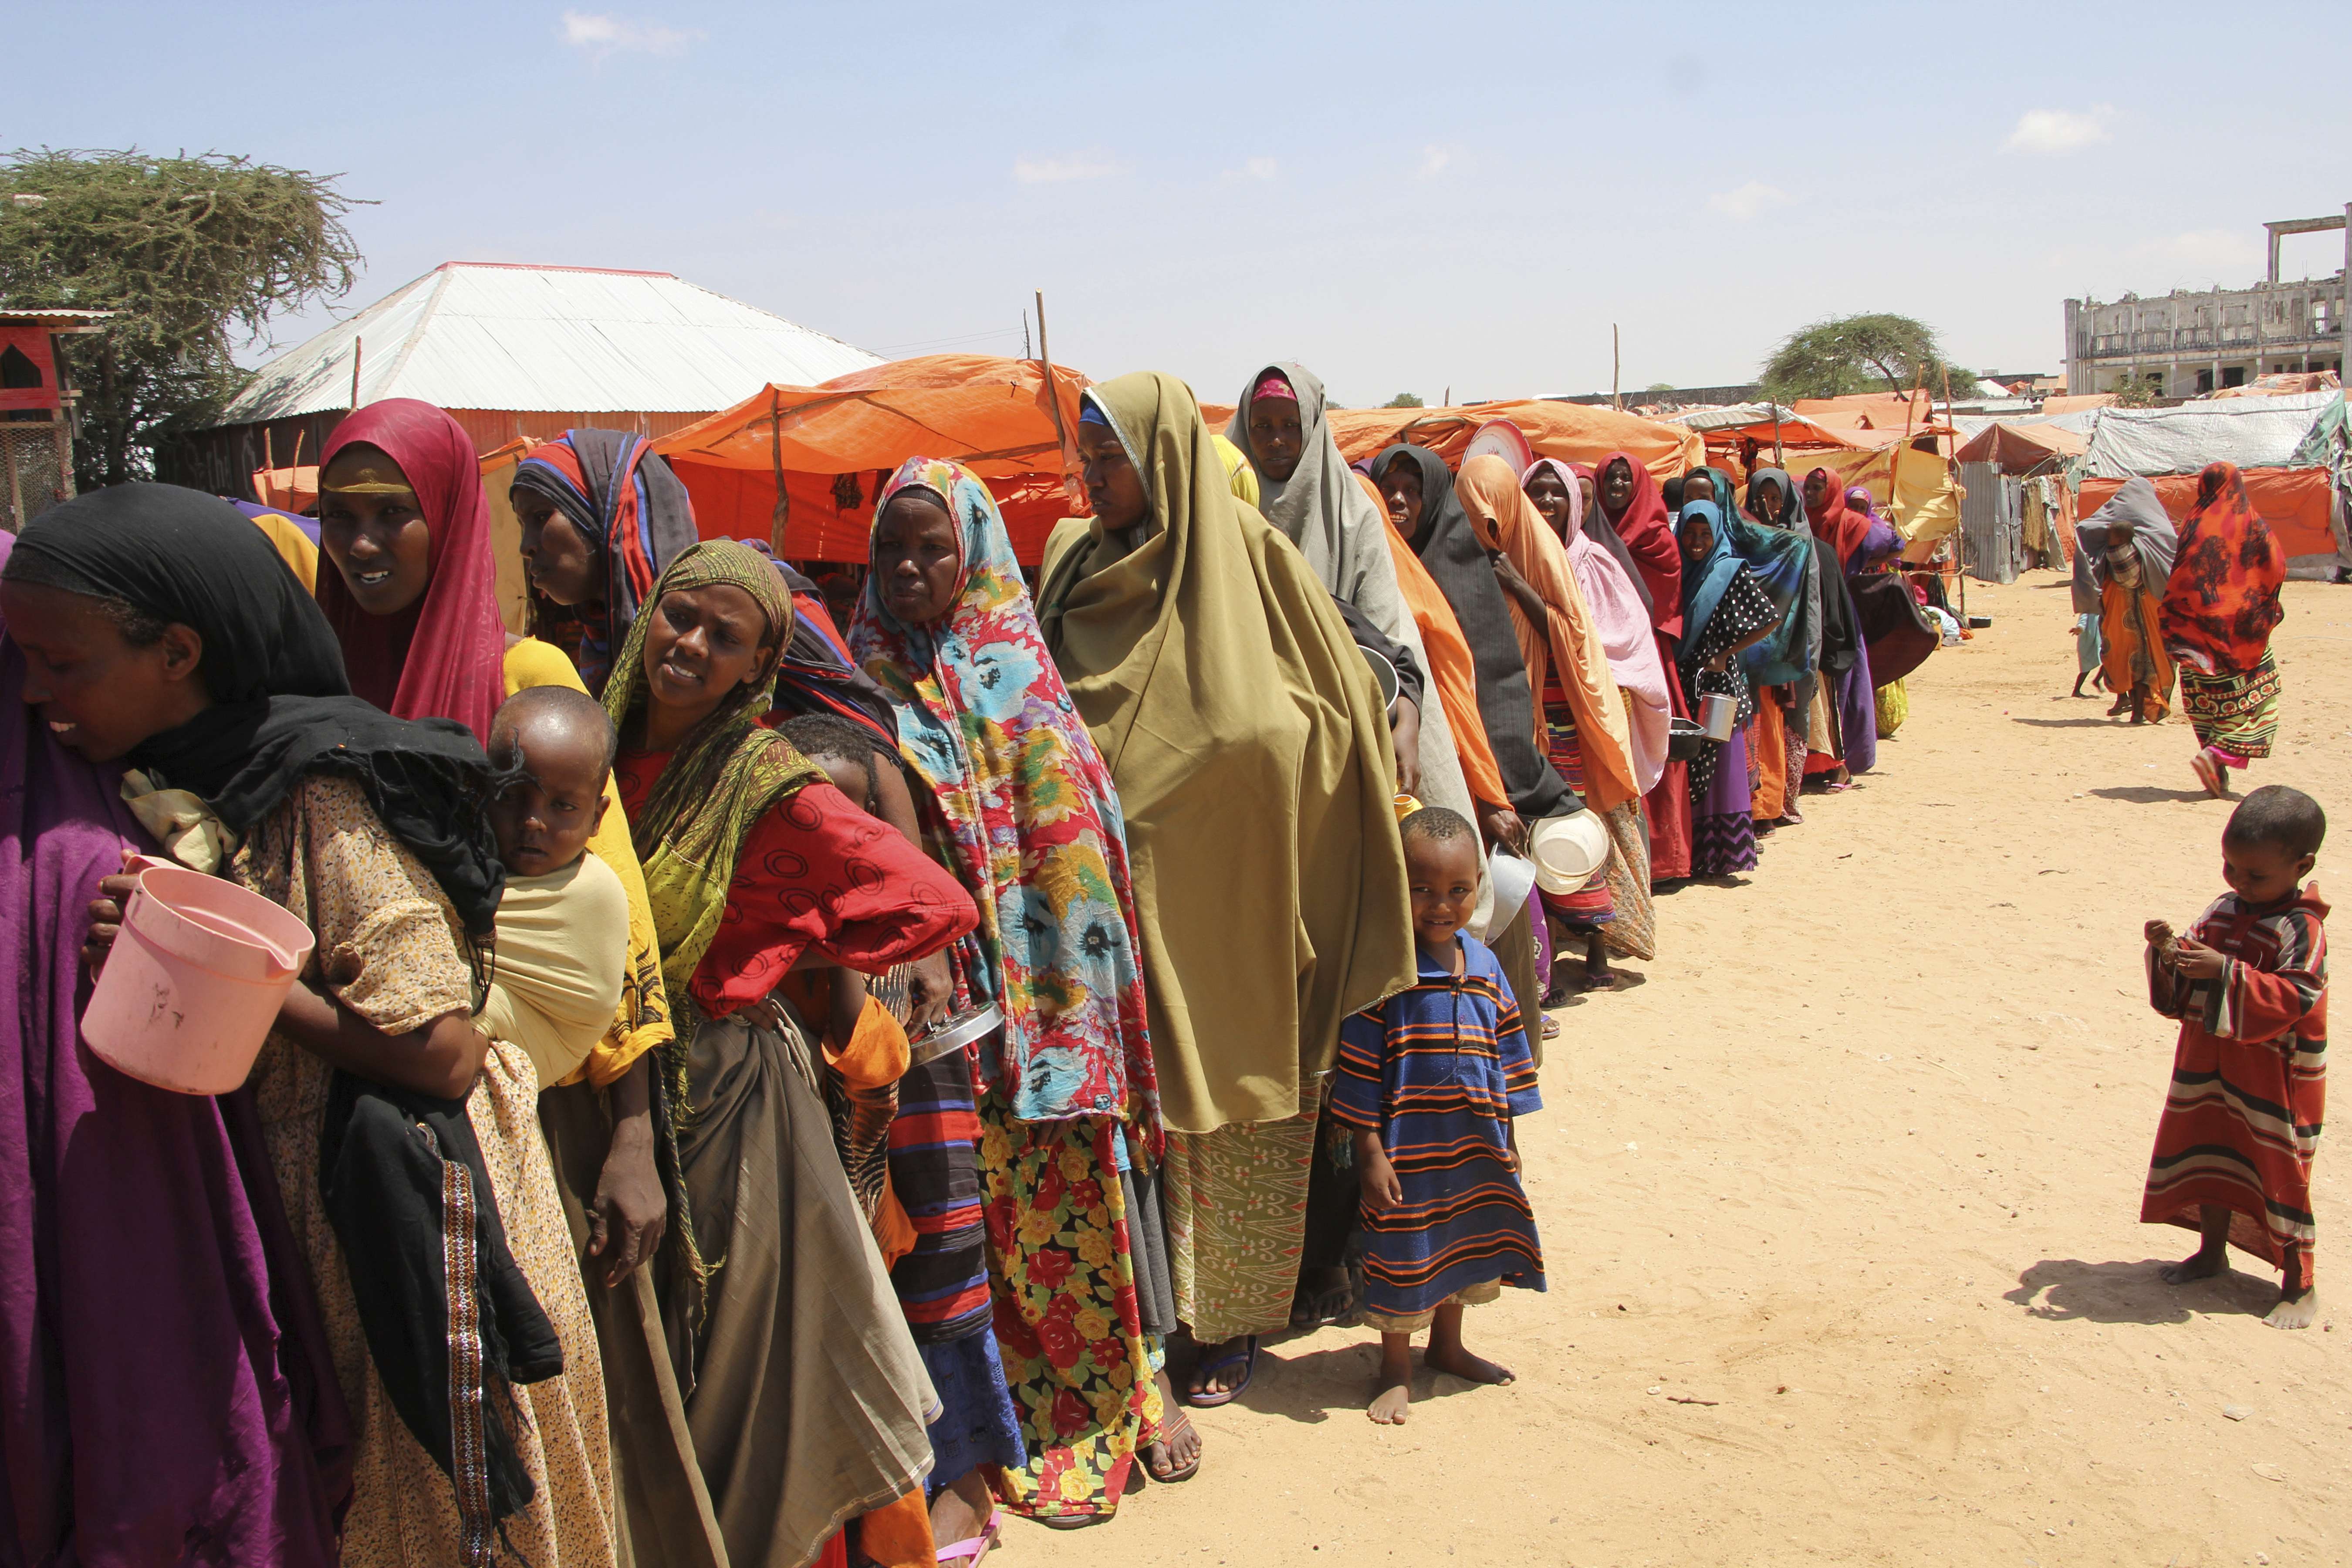 Displaced Somali women queue for food handouts in a camp outside Mogadishu, the capital of Somalia, on March, 27. Somalia's drought is threatening 3 million lives, the UN says, and aid agencies are calling for more urgent support to prevent the crisis from worsening. Photo: AP